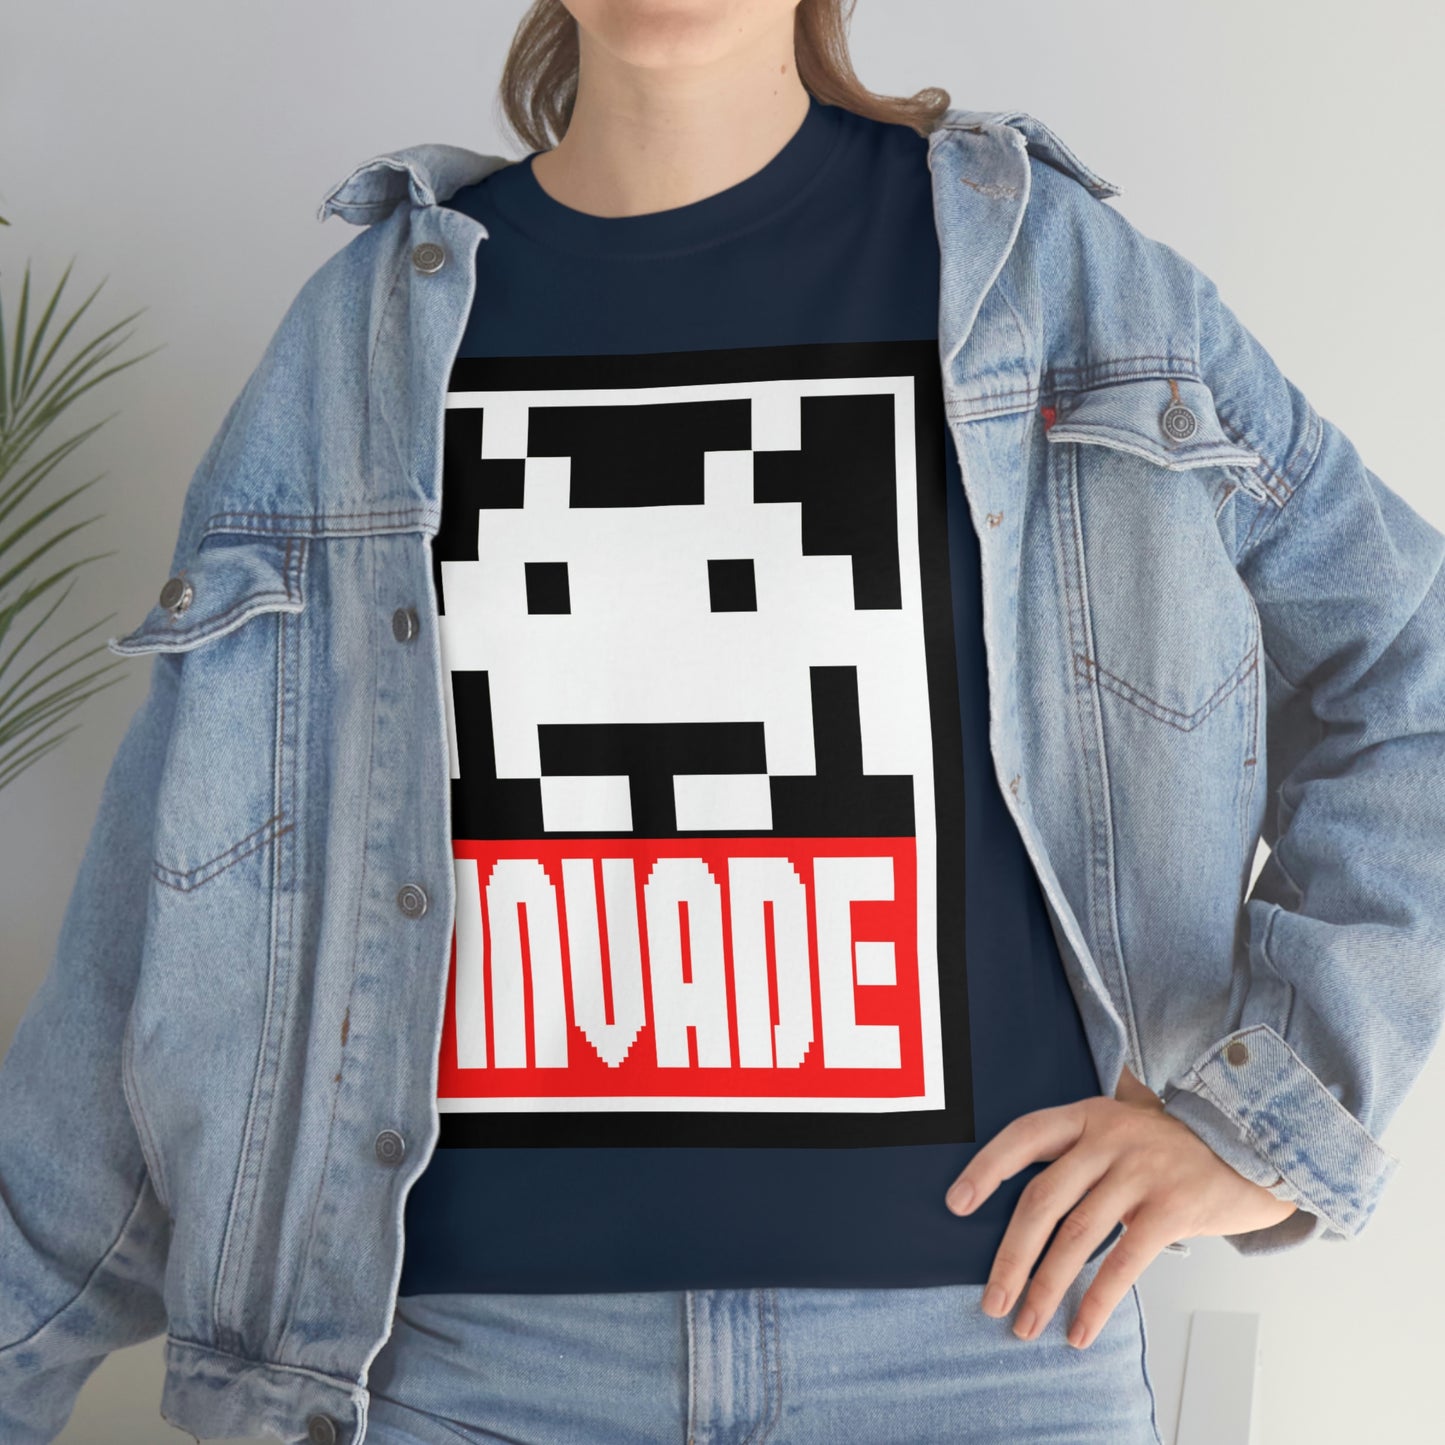 Space Invaders Men's Tee - Obey and Invade